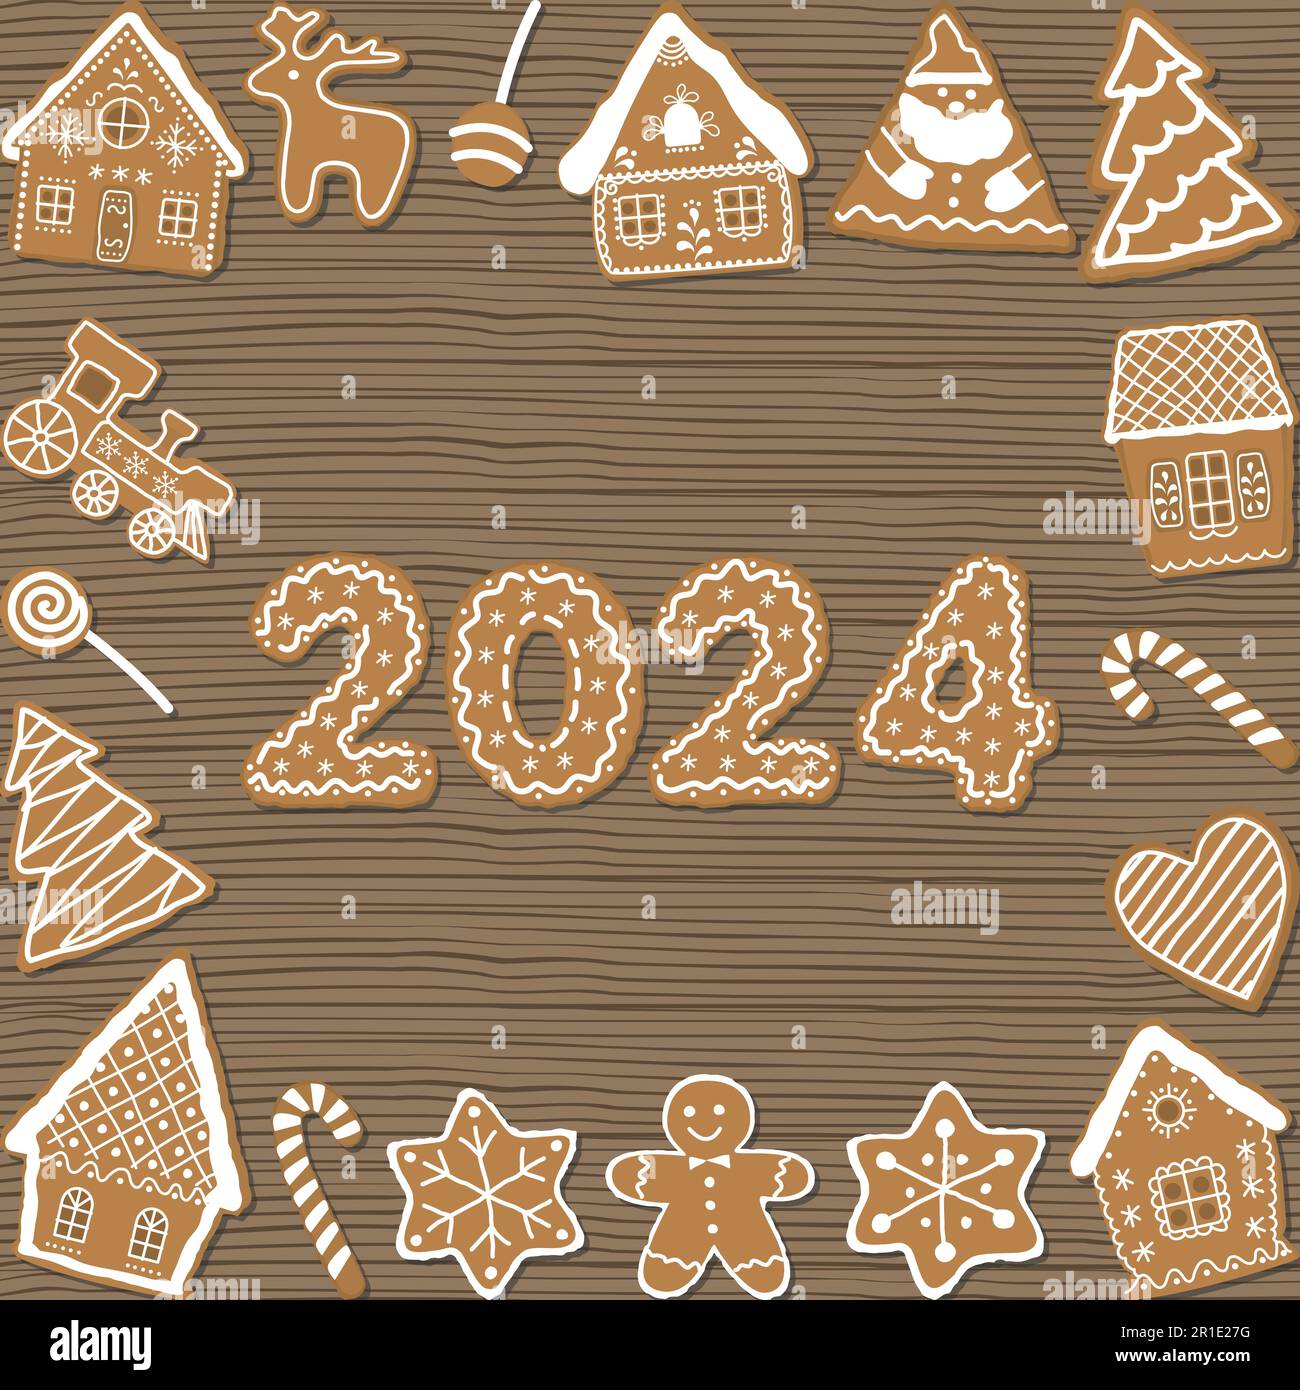 Christmas cookies on wooden background. Holiday background. Gingerbread houses, Santa Claus, deer, fir trees, gingerbread man, train, stars, heart and Stock Vector